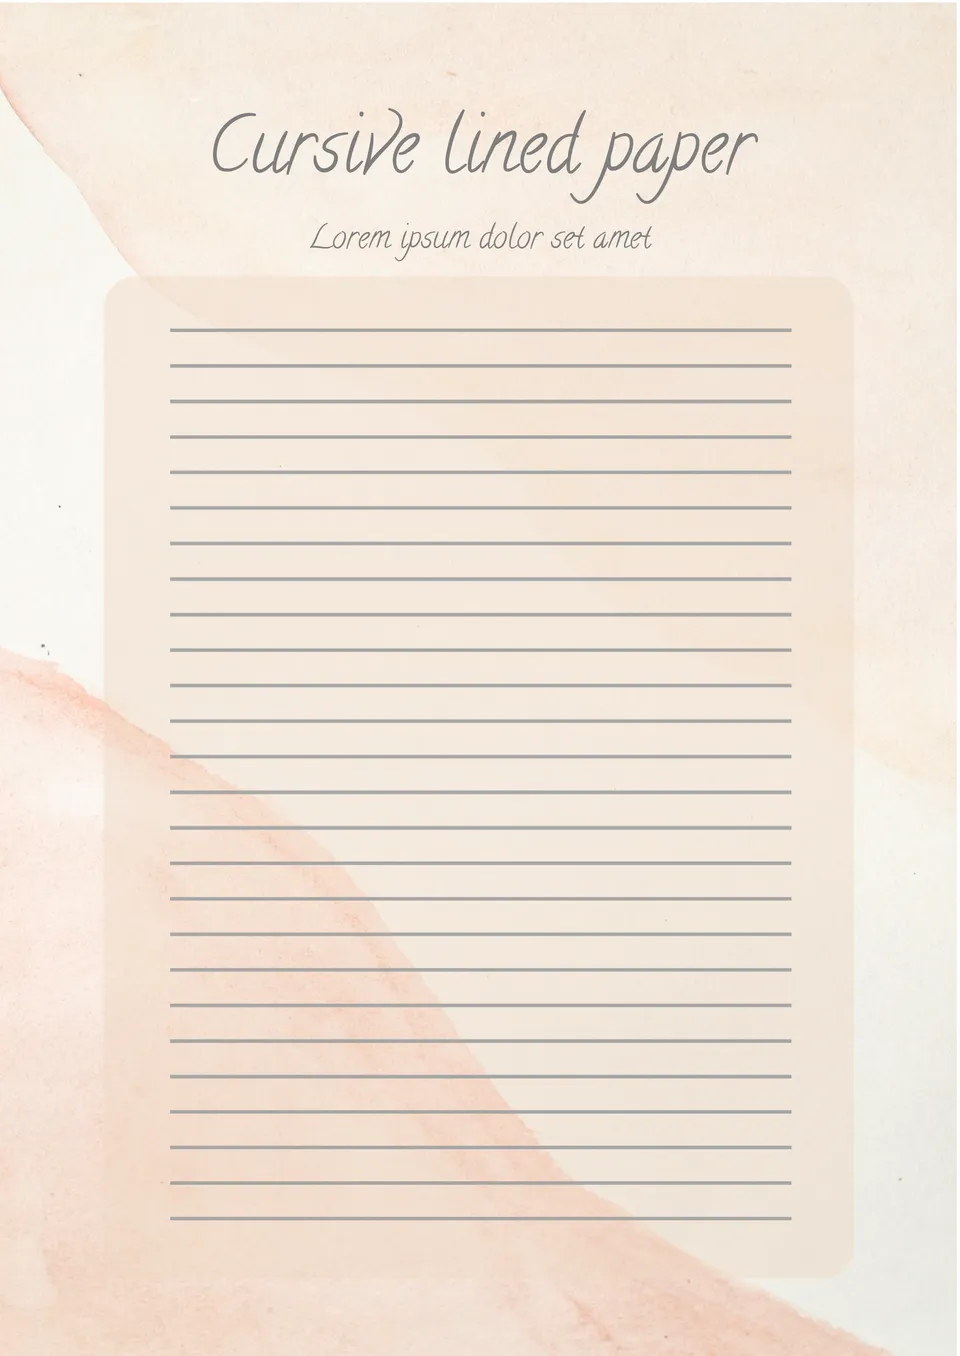 Cursive Lined Paper Template